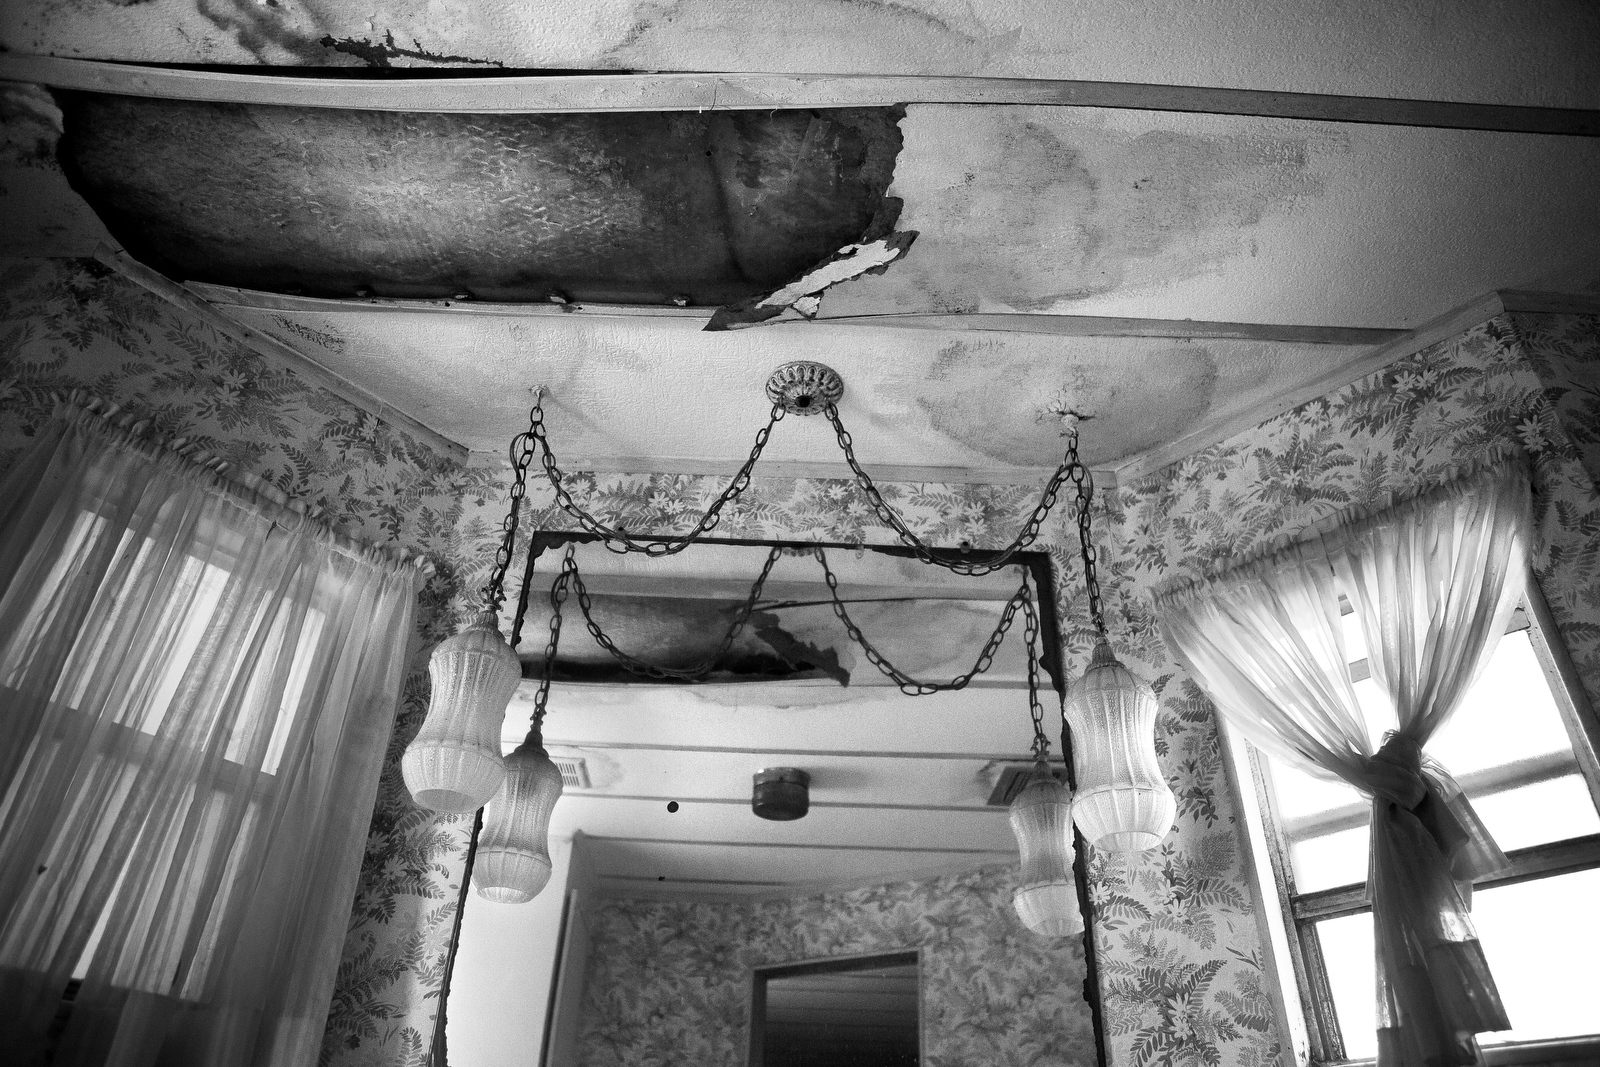  Holes in the ceiling mirror those in the floor of Charles Asaro's home in Hobe Sound. At 98-years-old Charles has been living in the house for nearly 40 years despite it being in desperate need of repairs. 